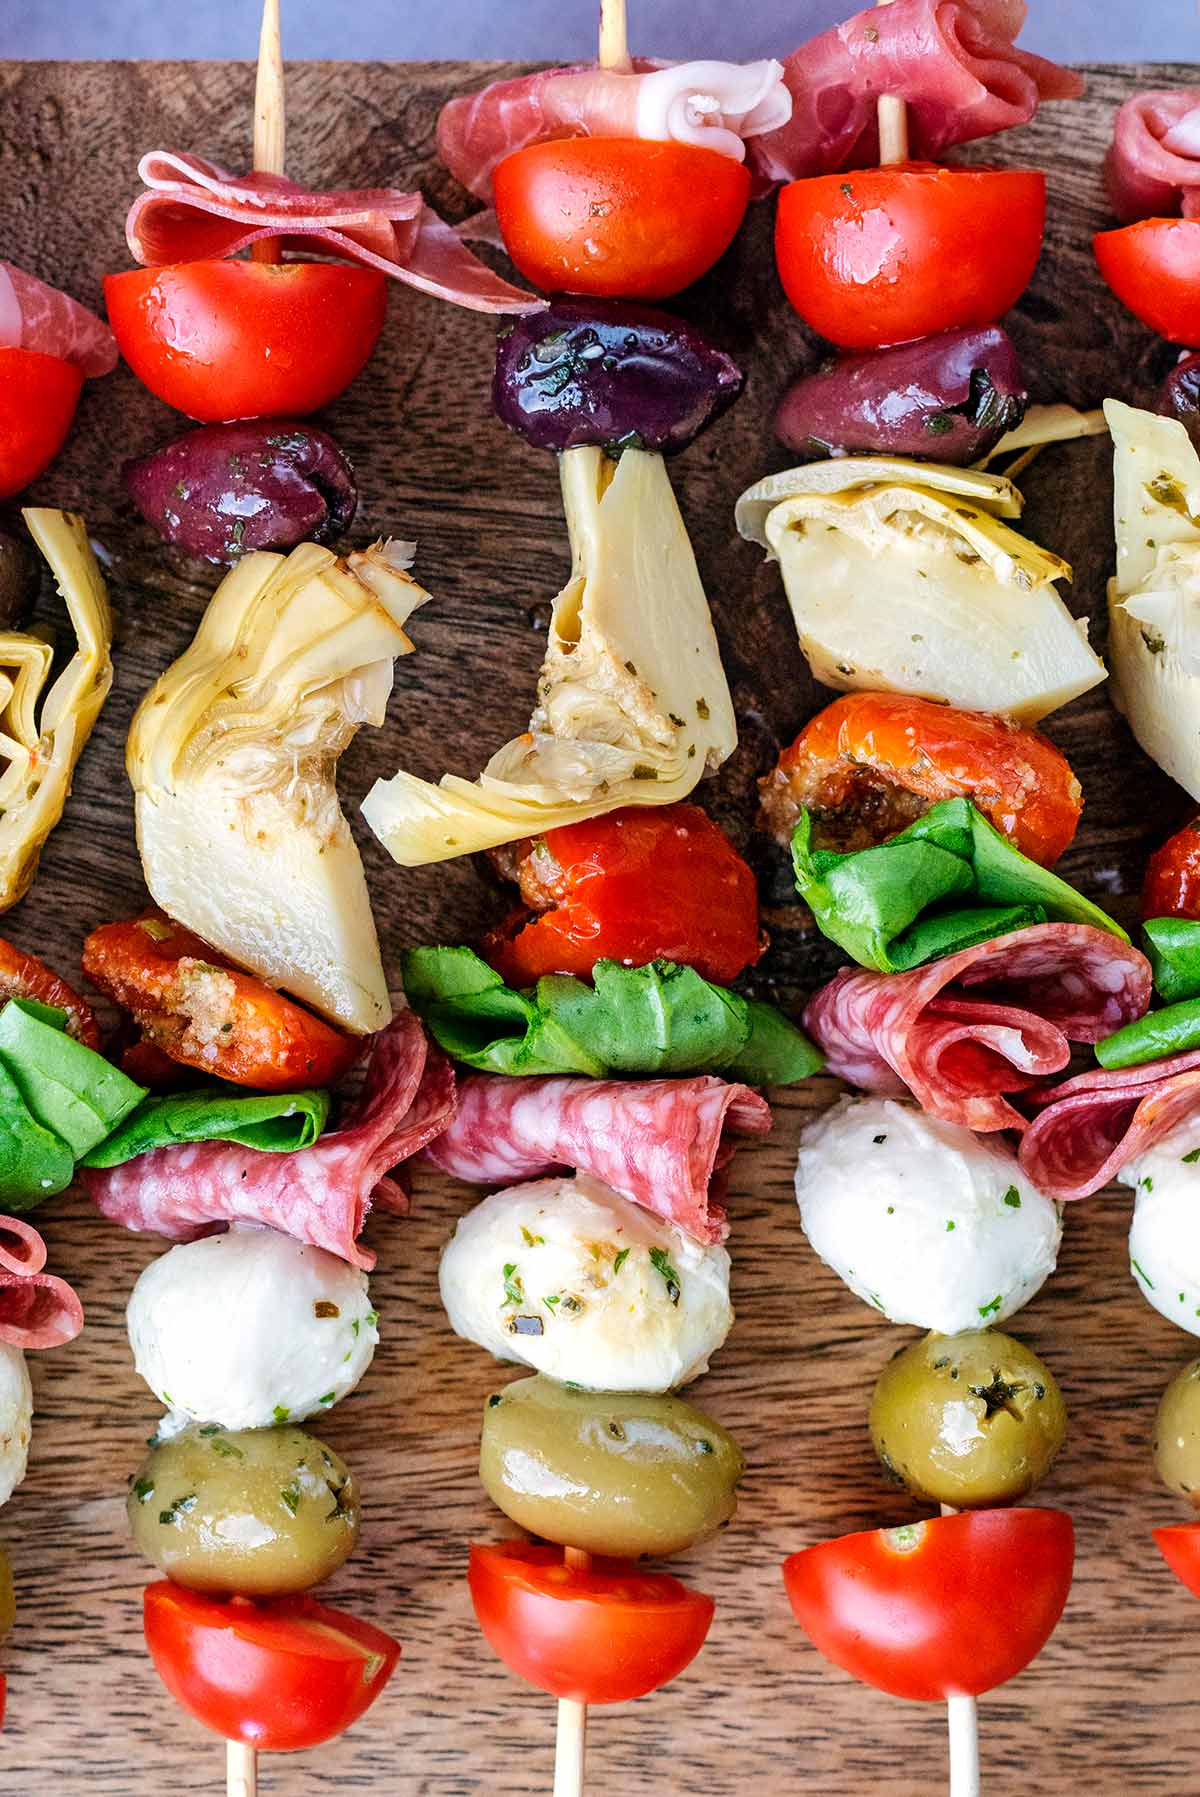 A selection of meats, cheese and vegetables on wooden skewers.